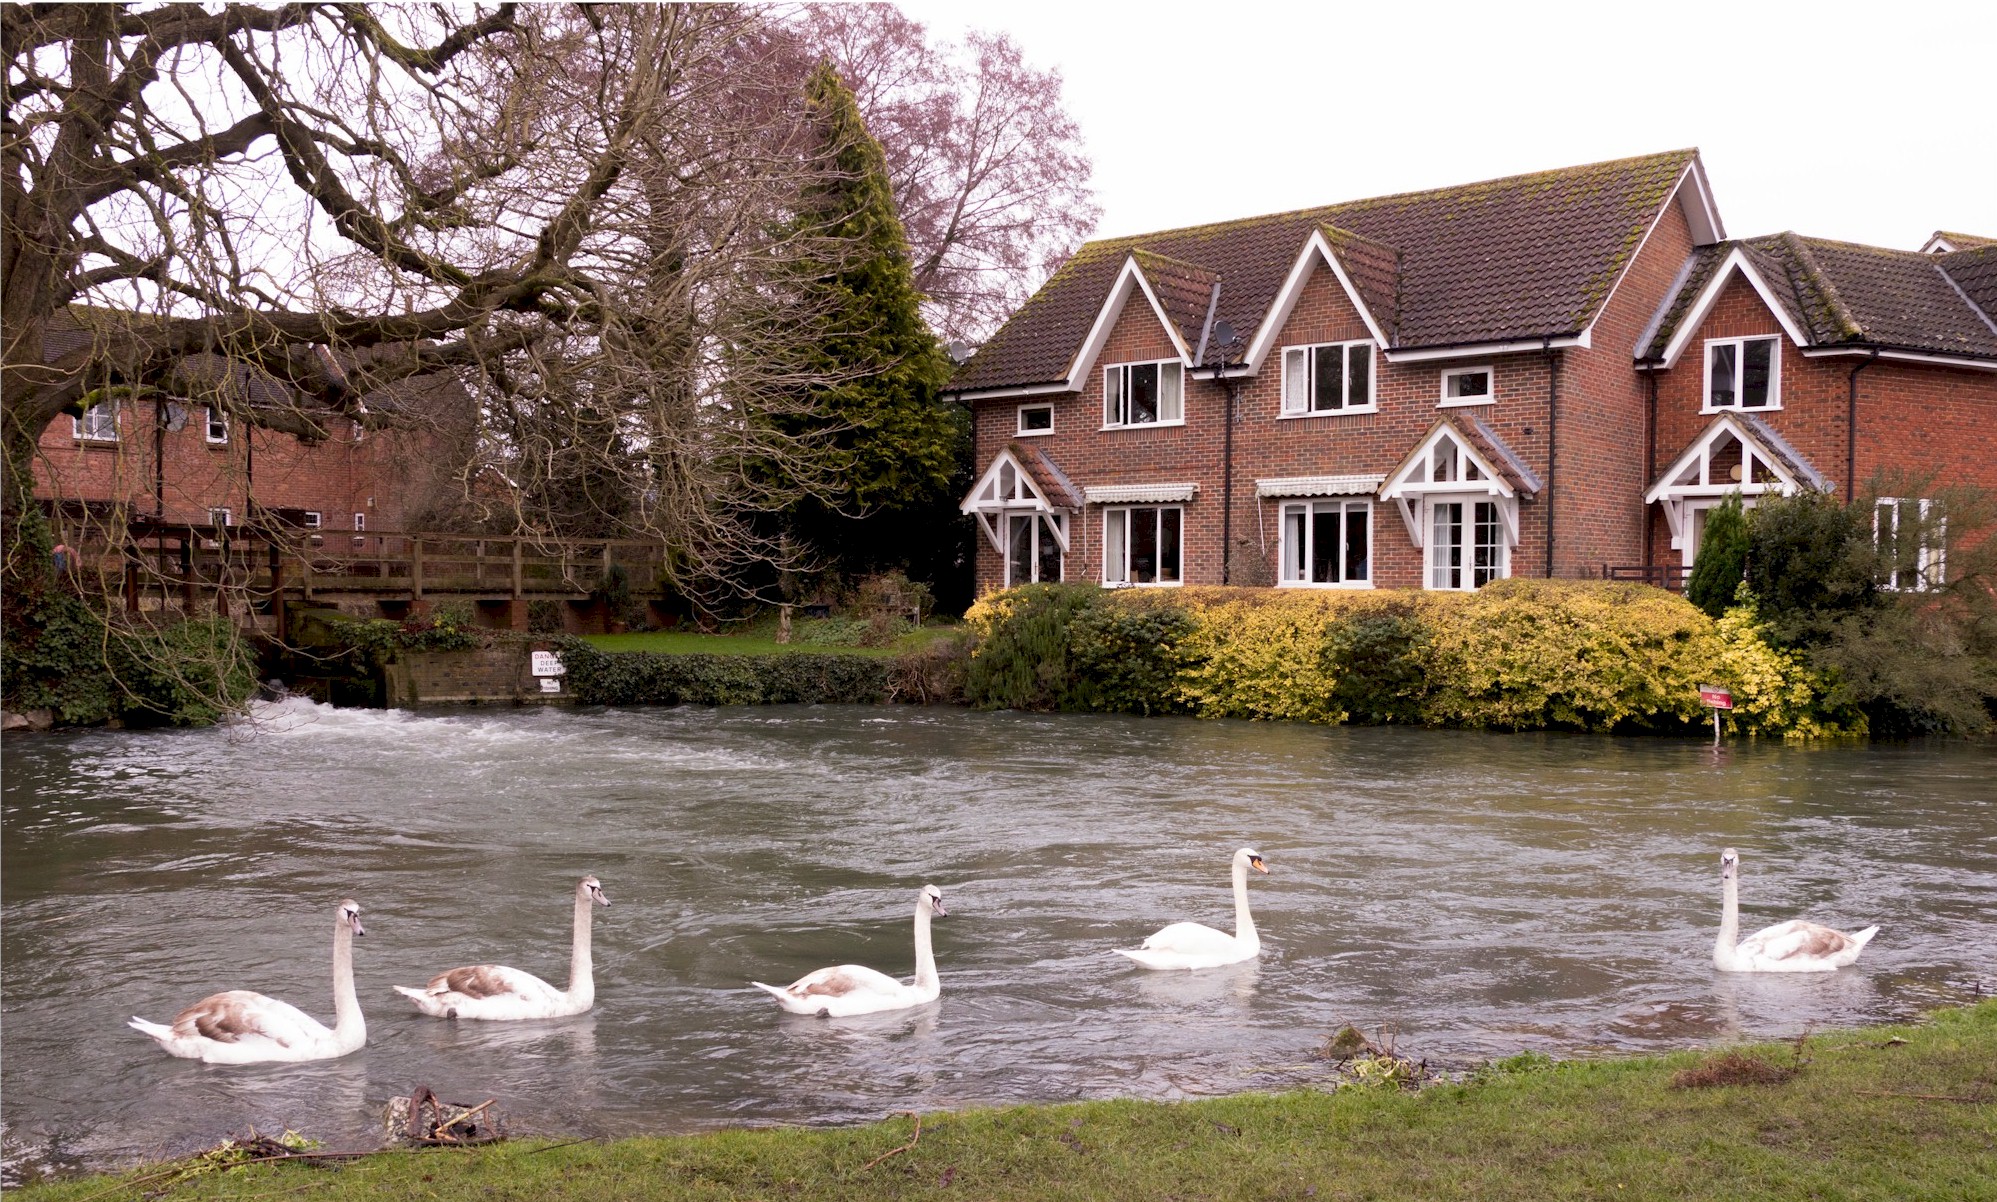  Swans On The Kennet, Town Mill